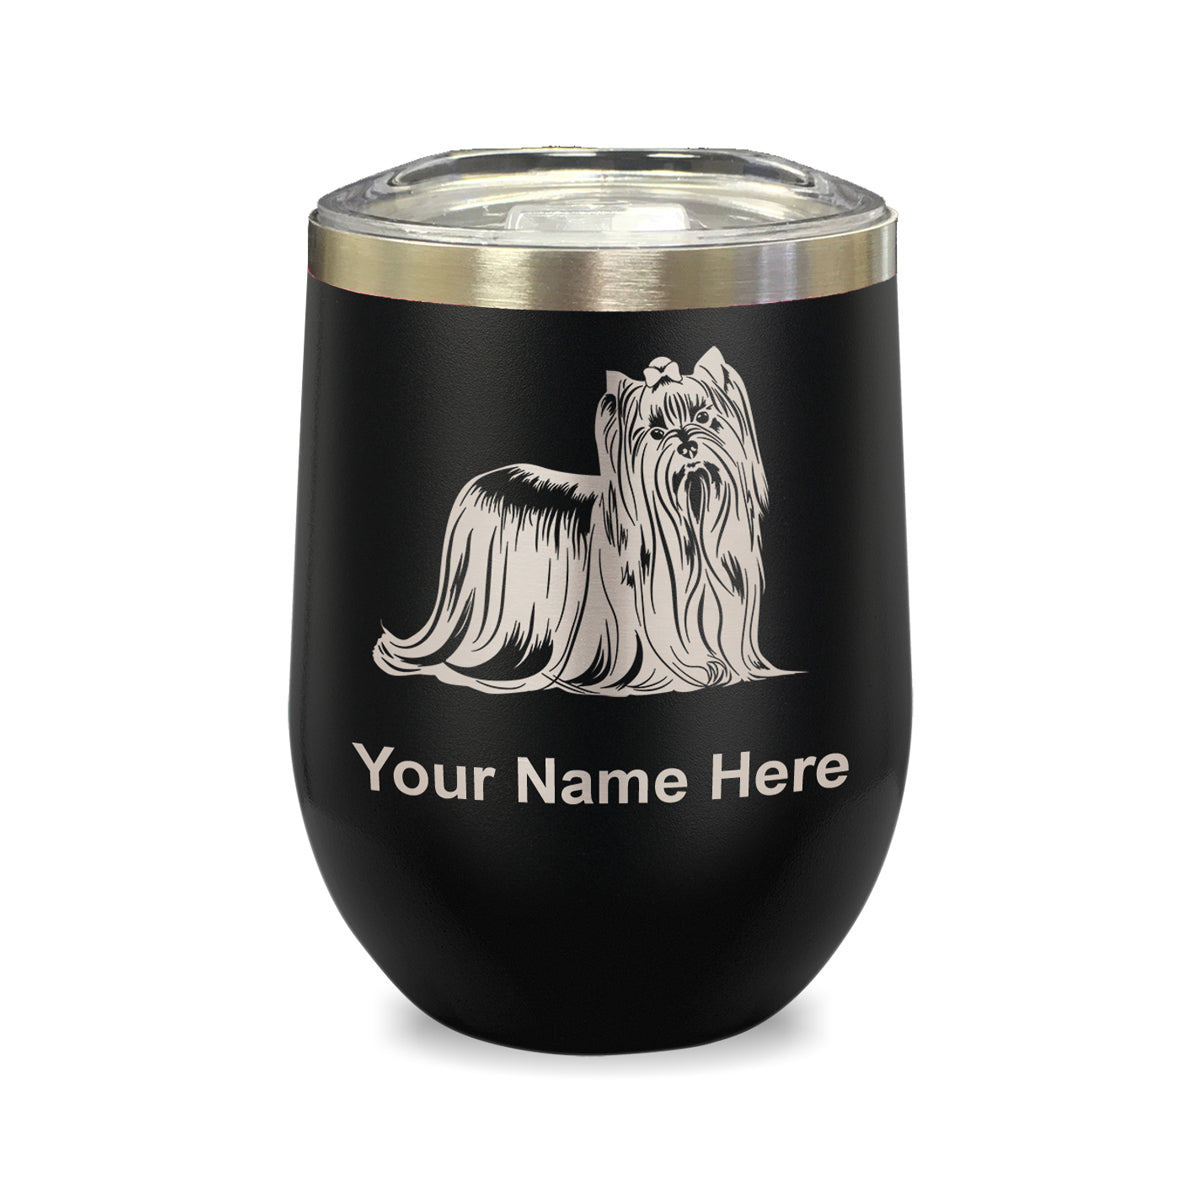 LaserGram Double Wall Stainless Steel Wine Glass, Yorkshire Terrier Dog, Personalized Engraving Included